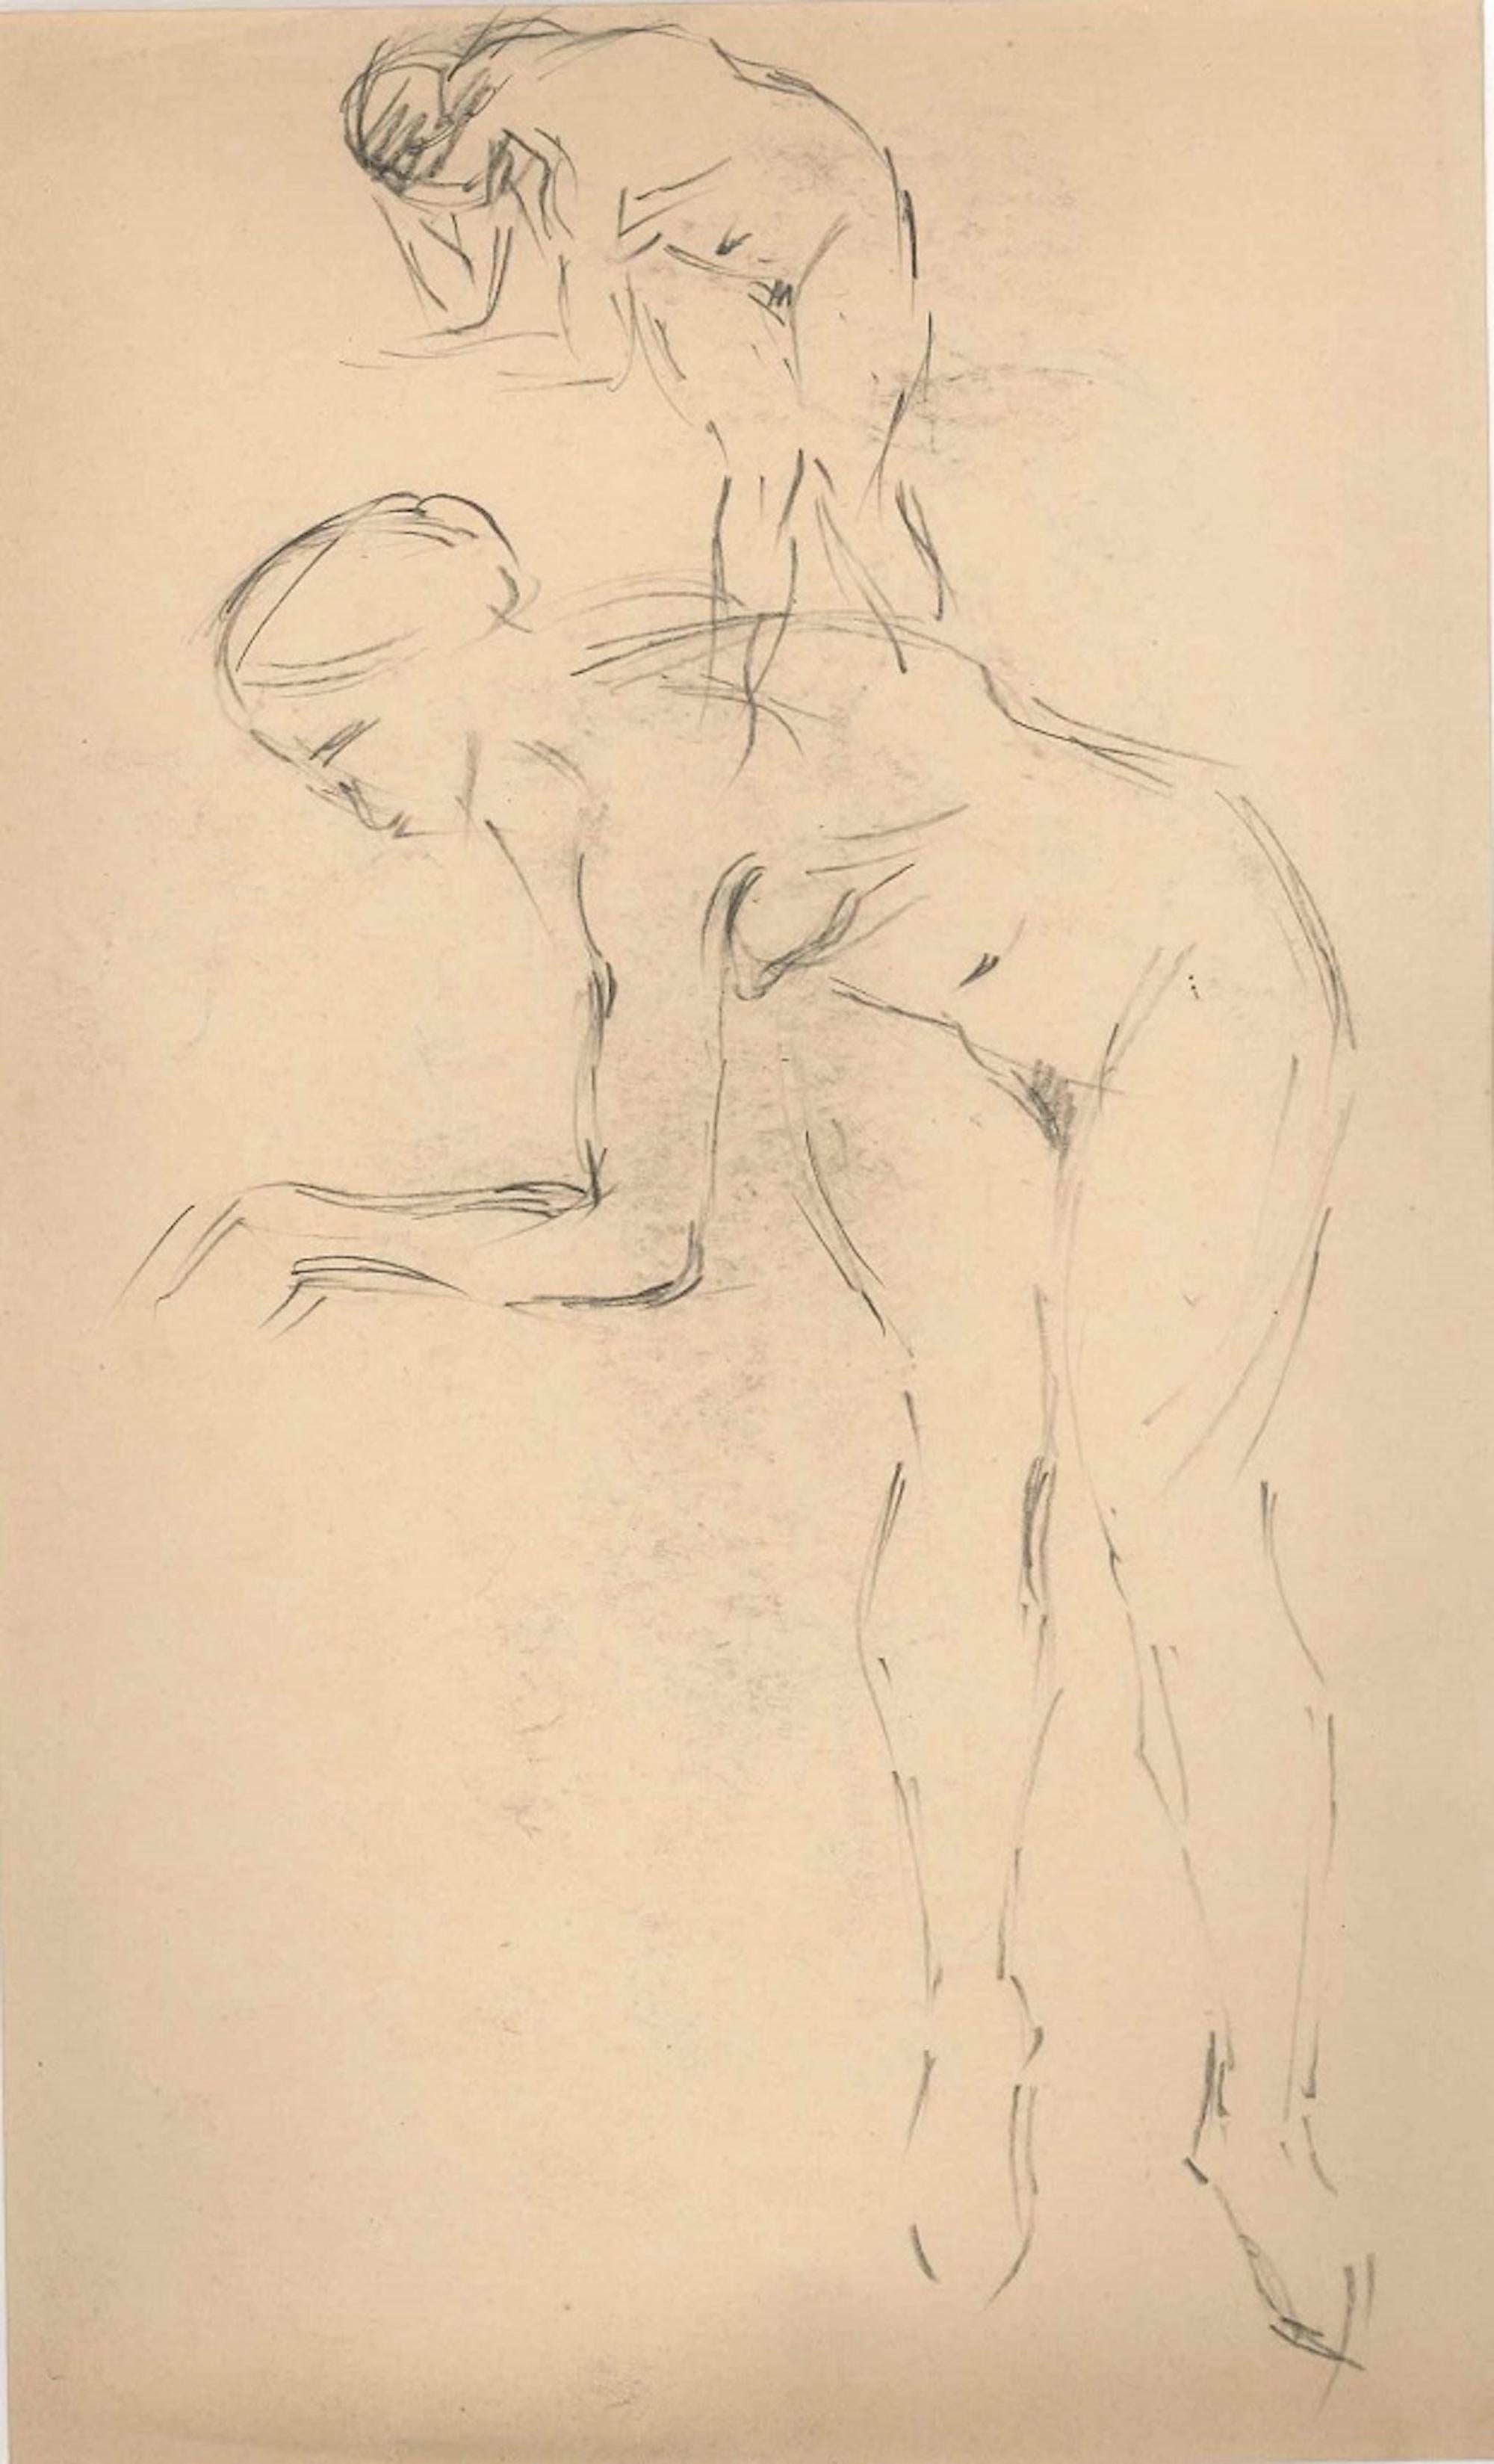 Unknown Figurative Art - Double Nude  - Original Drawing - Early 20th Century